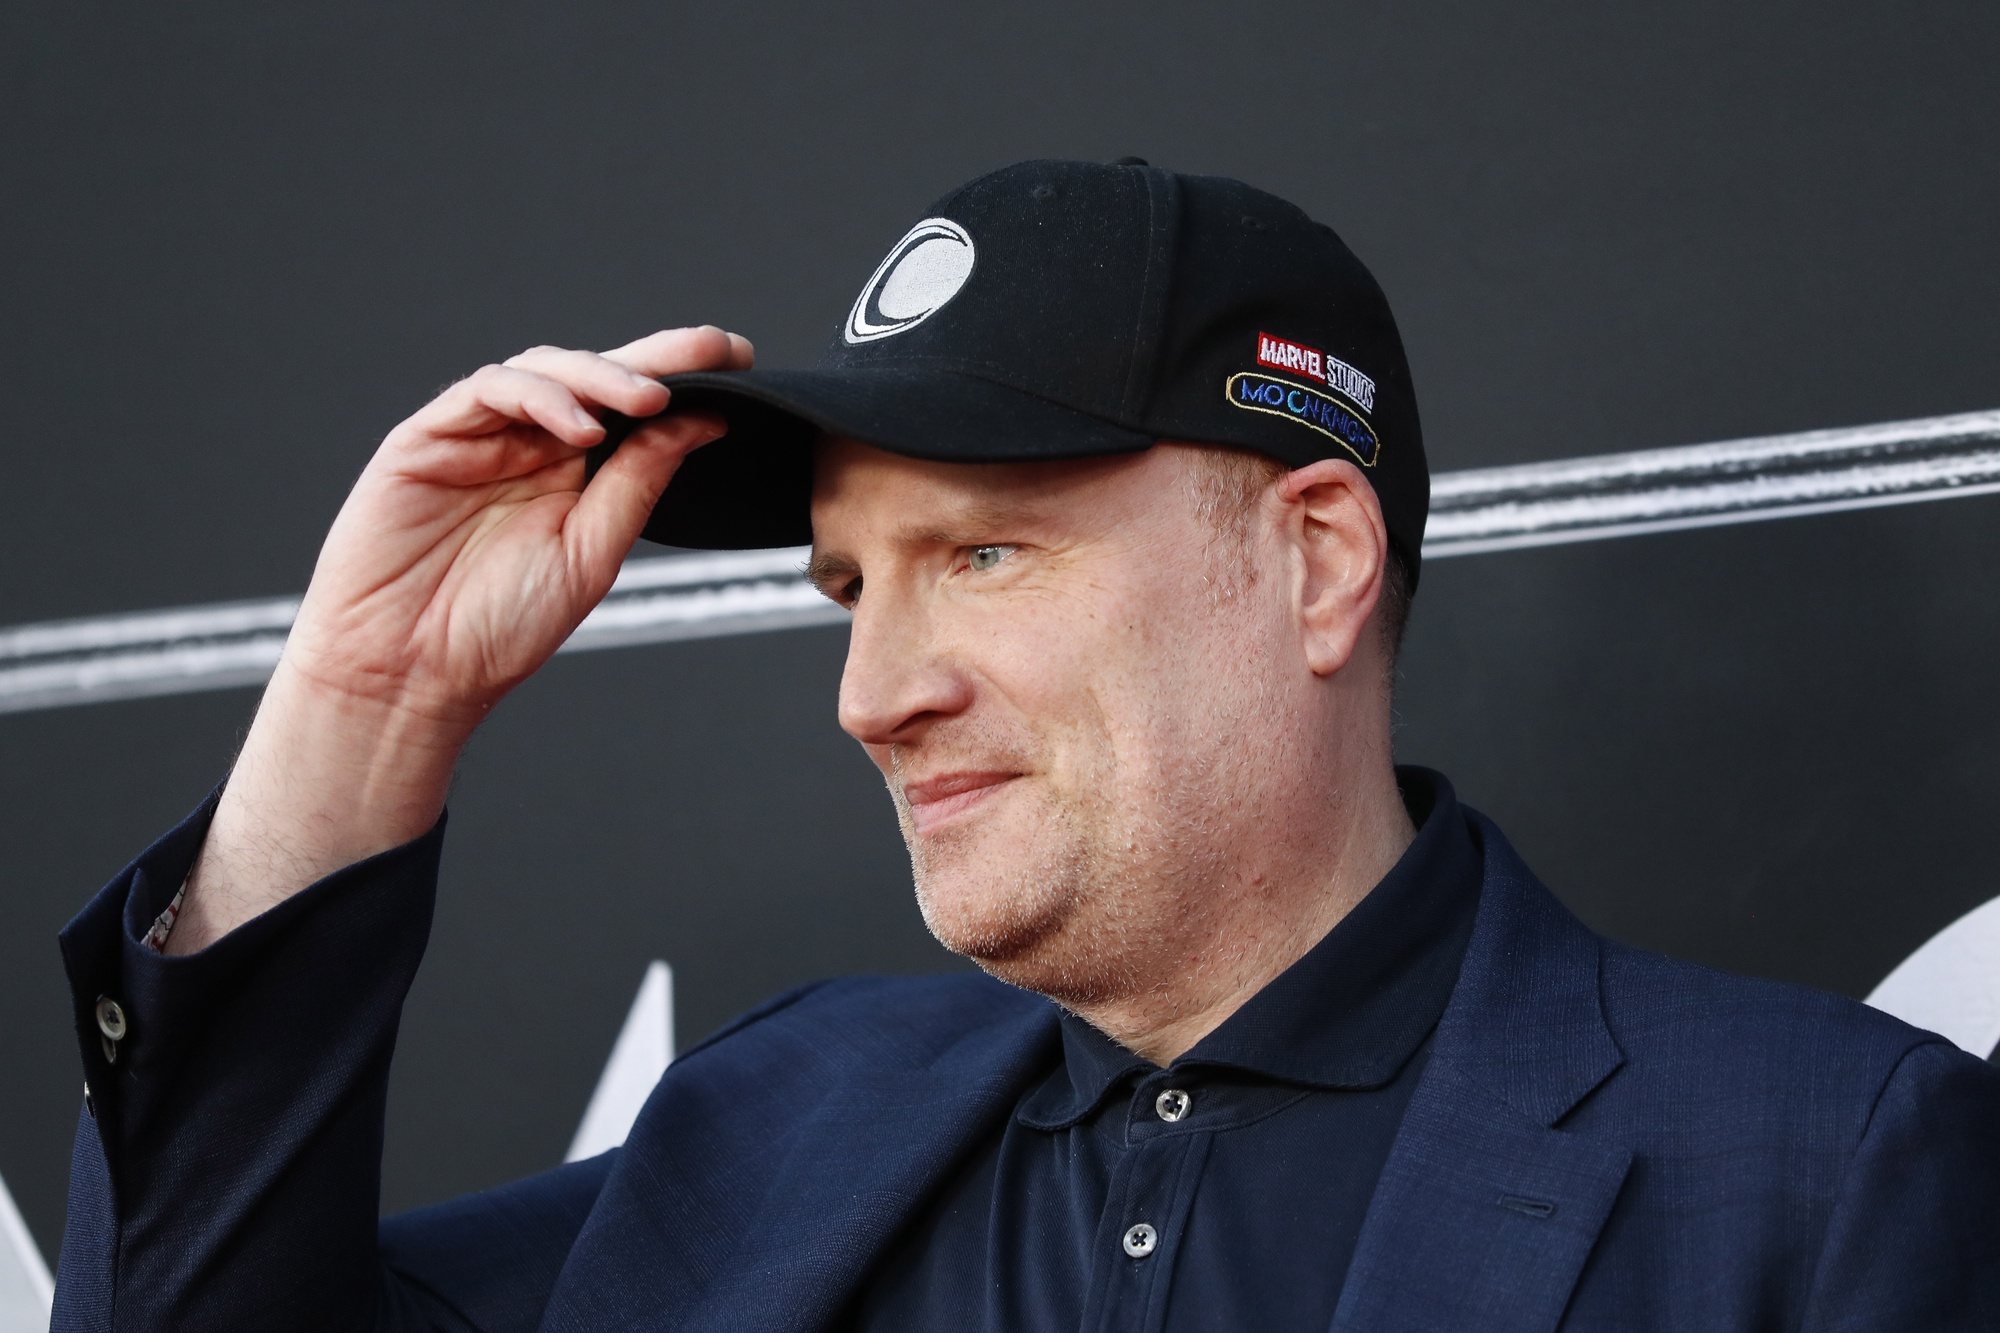 epa09843471 President of Marvel Studios Kevin Feige attends the premiere of Disney’s &#039;Moon Knight&#039; at the El Capitan Theatre in Los Angeles, California, USA, 22 March 2022. &#039;Moon Knight&#039; will be available for streaming on Disney Plus on 30 March 2022.  EPA/CAROLINE BREHMAN